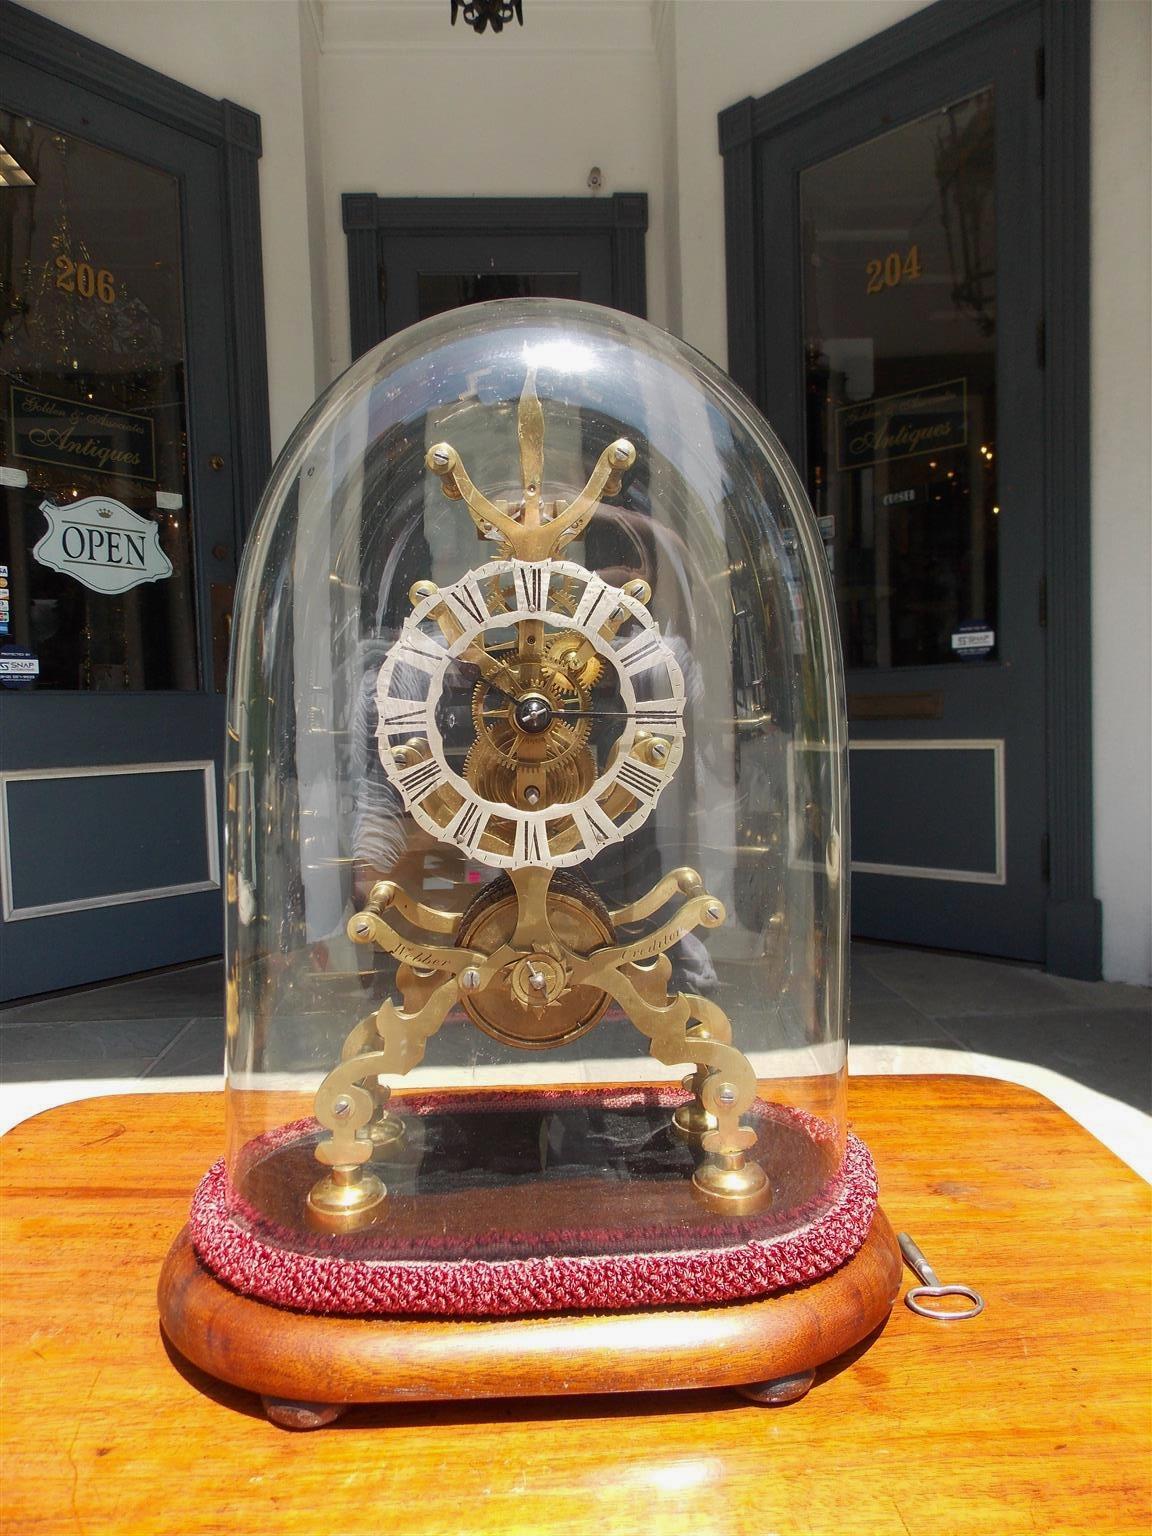 English brass skeleton clock under original glass dome with a polished steel roman numeral dial, fuse chain movement, and affixed to an oval carved wood felt base with four bun feet. Stamped Webber, Town of Credition. Late 19th century. Clock is in